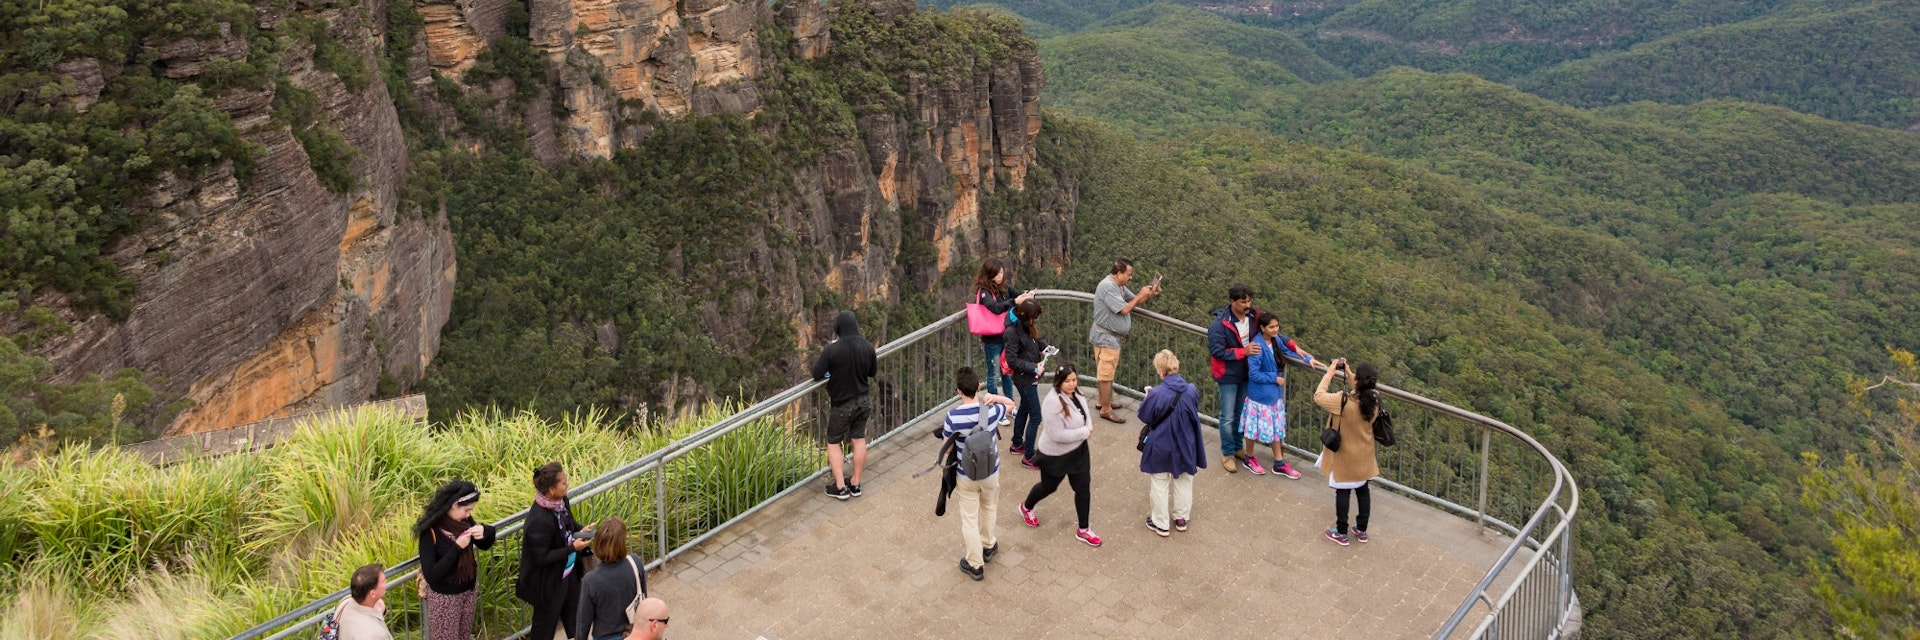 Blue Mountains, Australia - May 1, 2016: People at observation deck at Echo point lookout with view of famous Three Sisters mountains and Blue Mountains eucalyptus forest